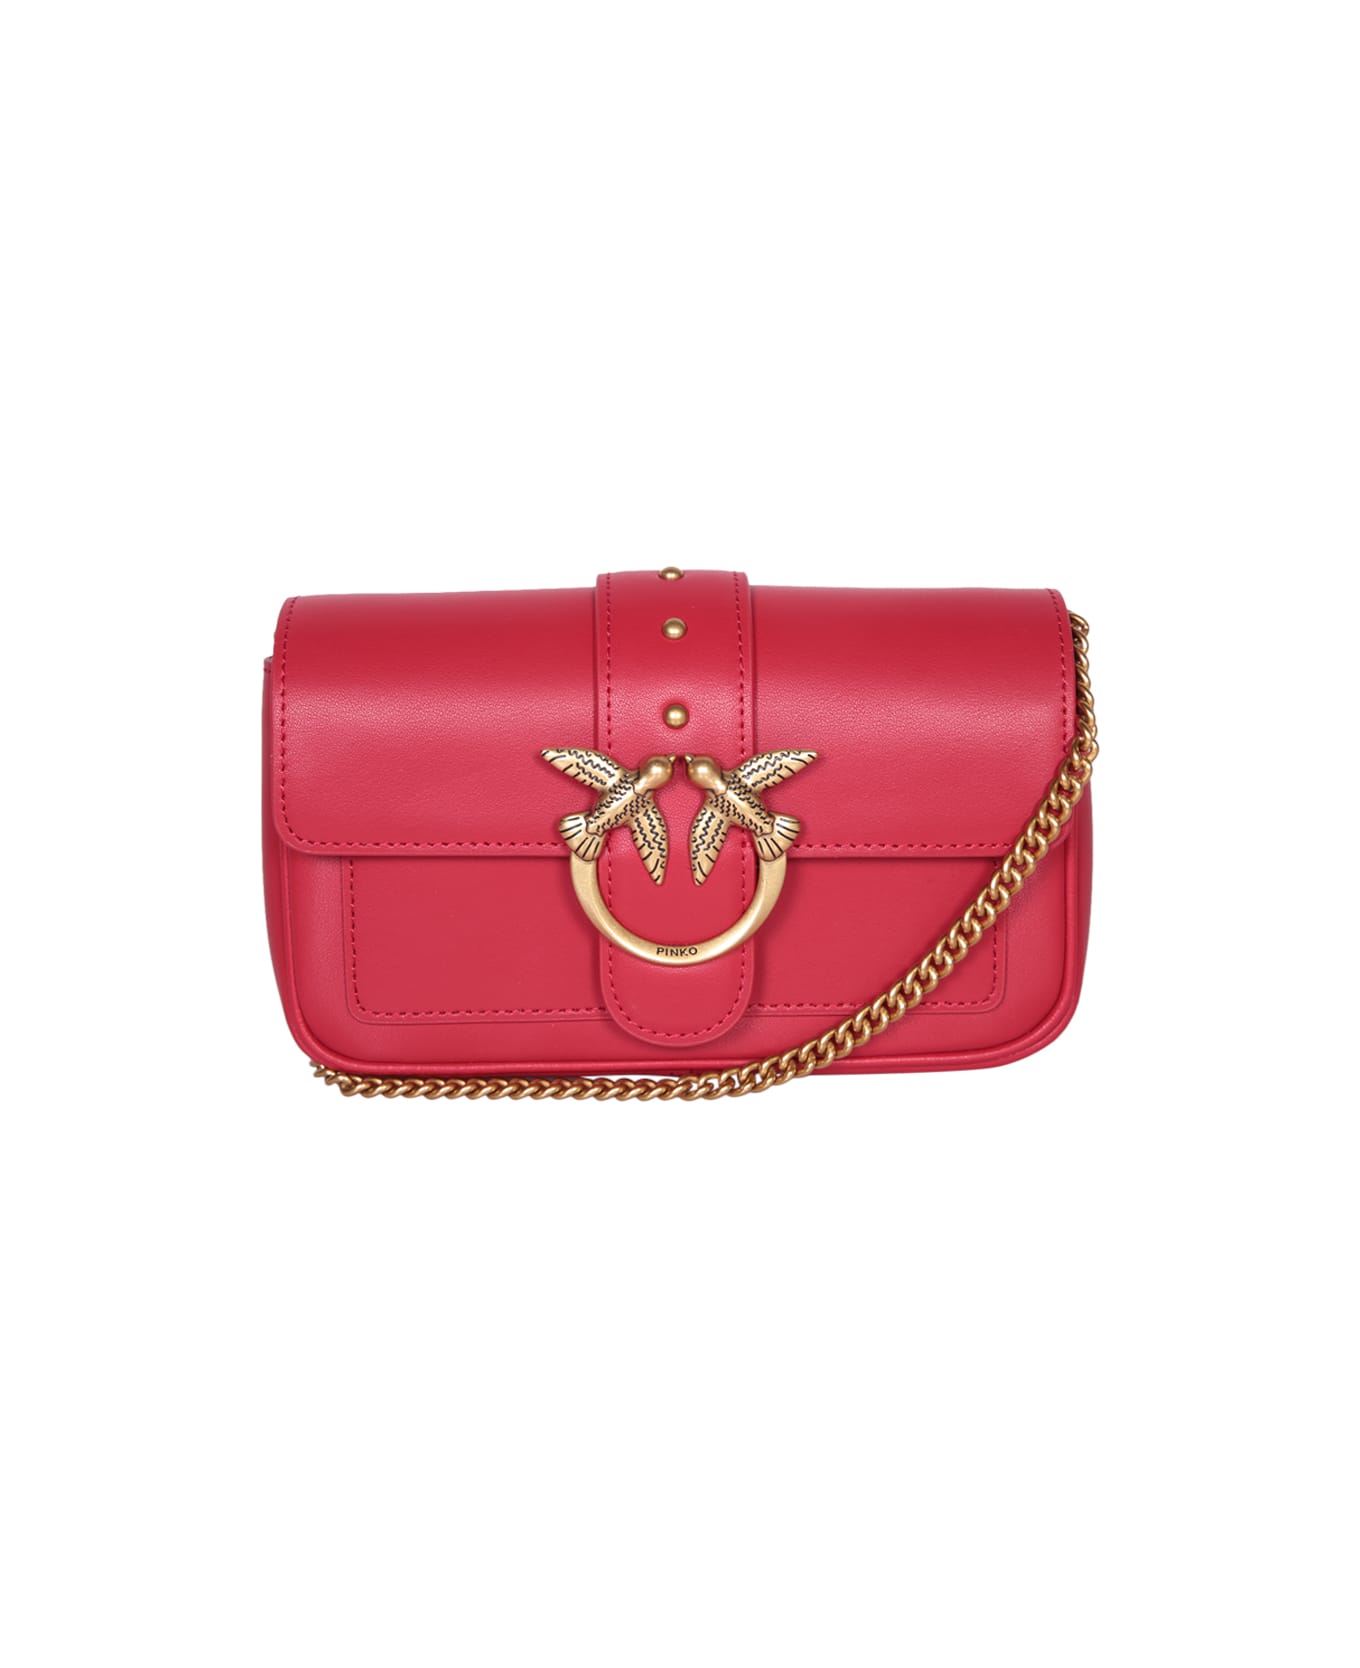 Pinko Love One Pocket Red Bag - Red ショルダーバッグ